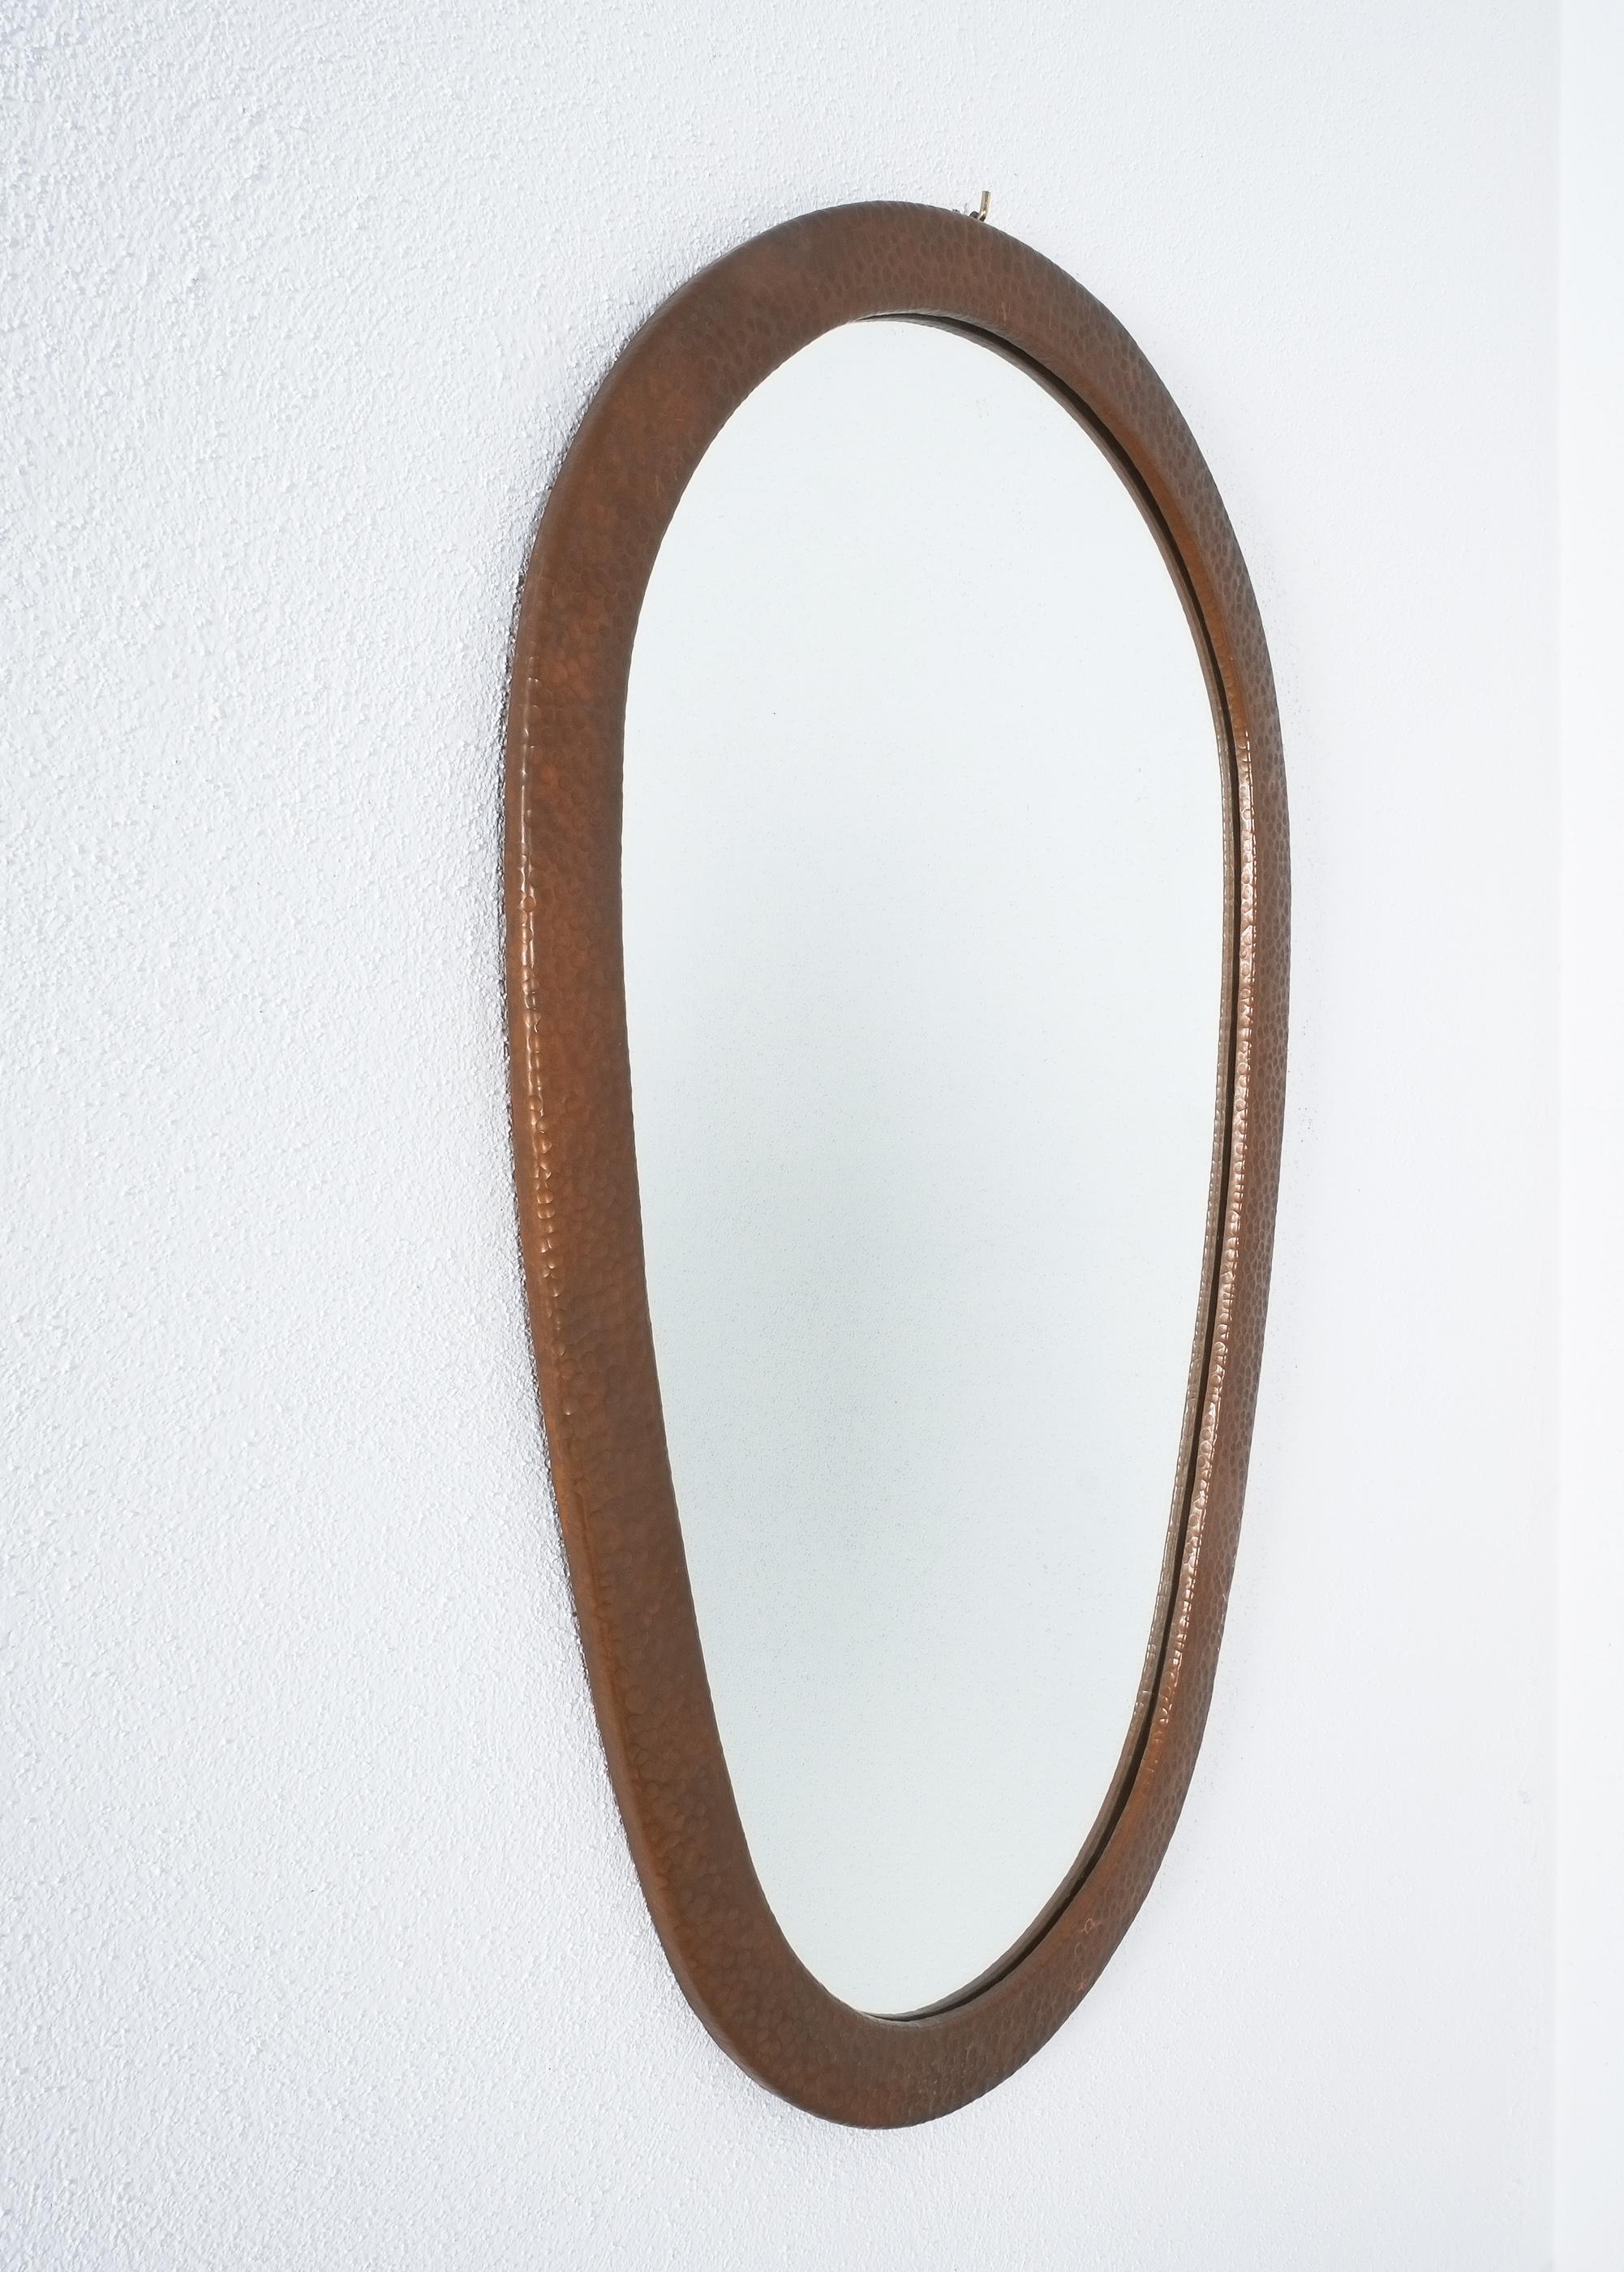 Wall Mirror Large Copper Hammered Frame, Midcentury, Italy For Sale 1